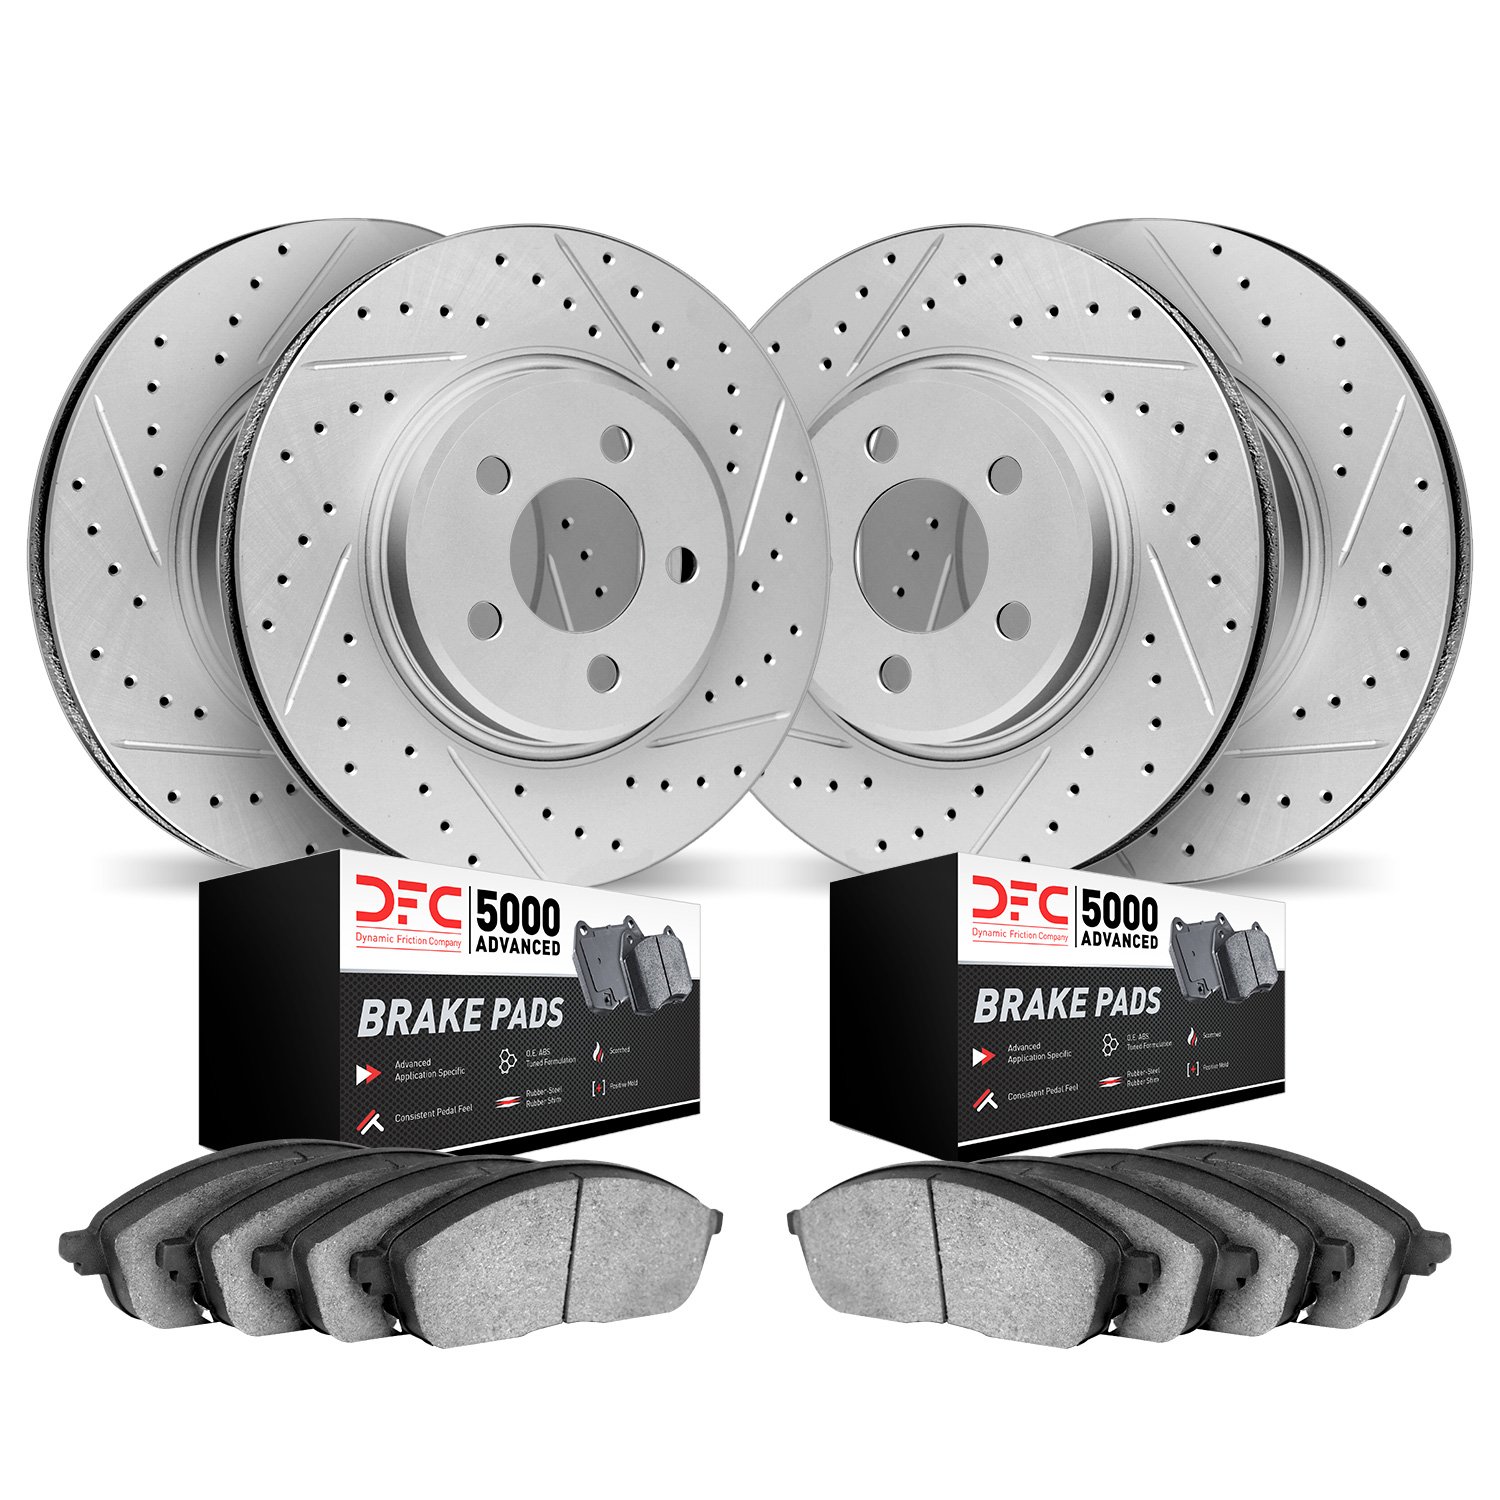 2504-26003 Geoperformance Drilled/Slotted Rotors w/5000 Advanced Brake Pads Kit, Fits Select Tesla, Position: Front and Rear